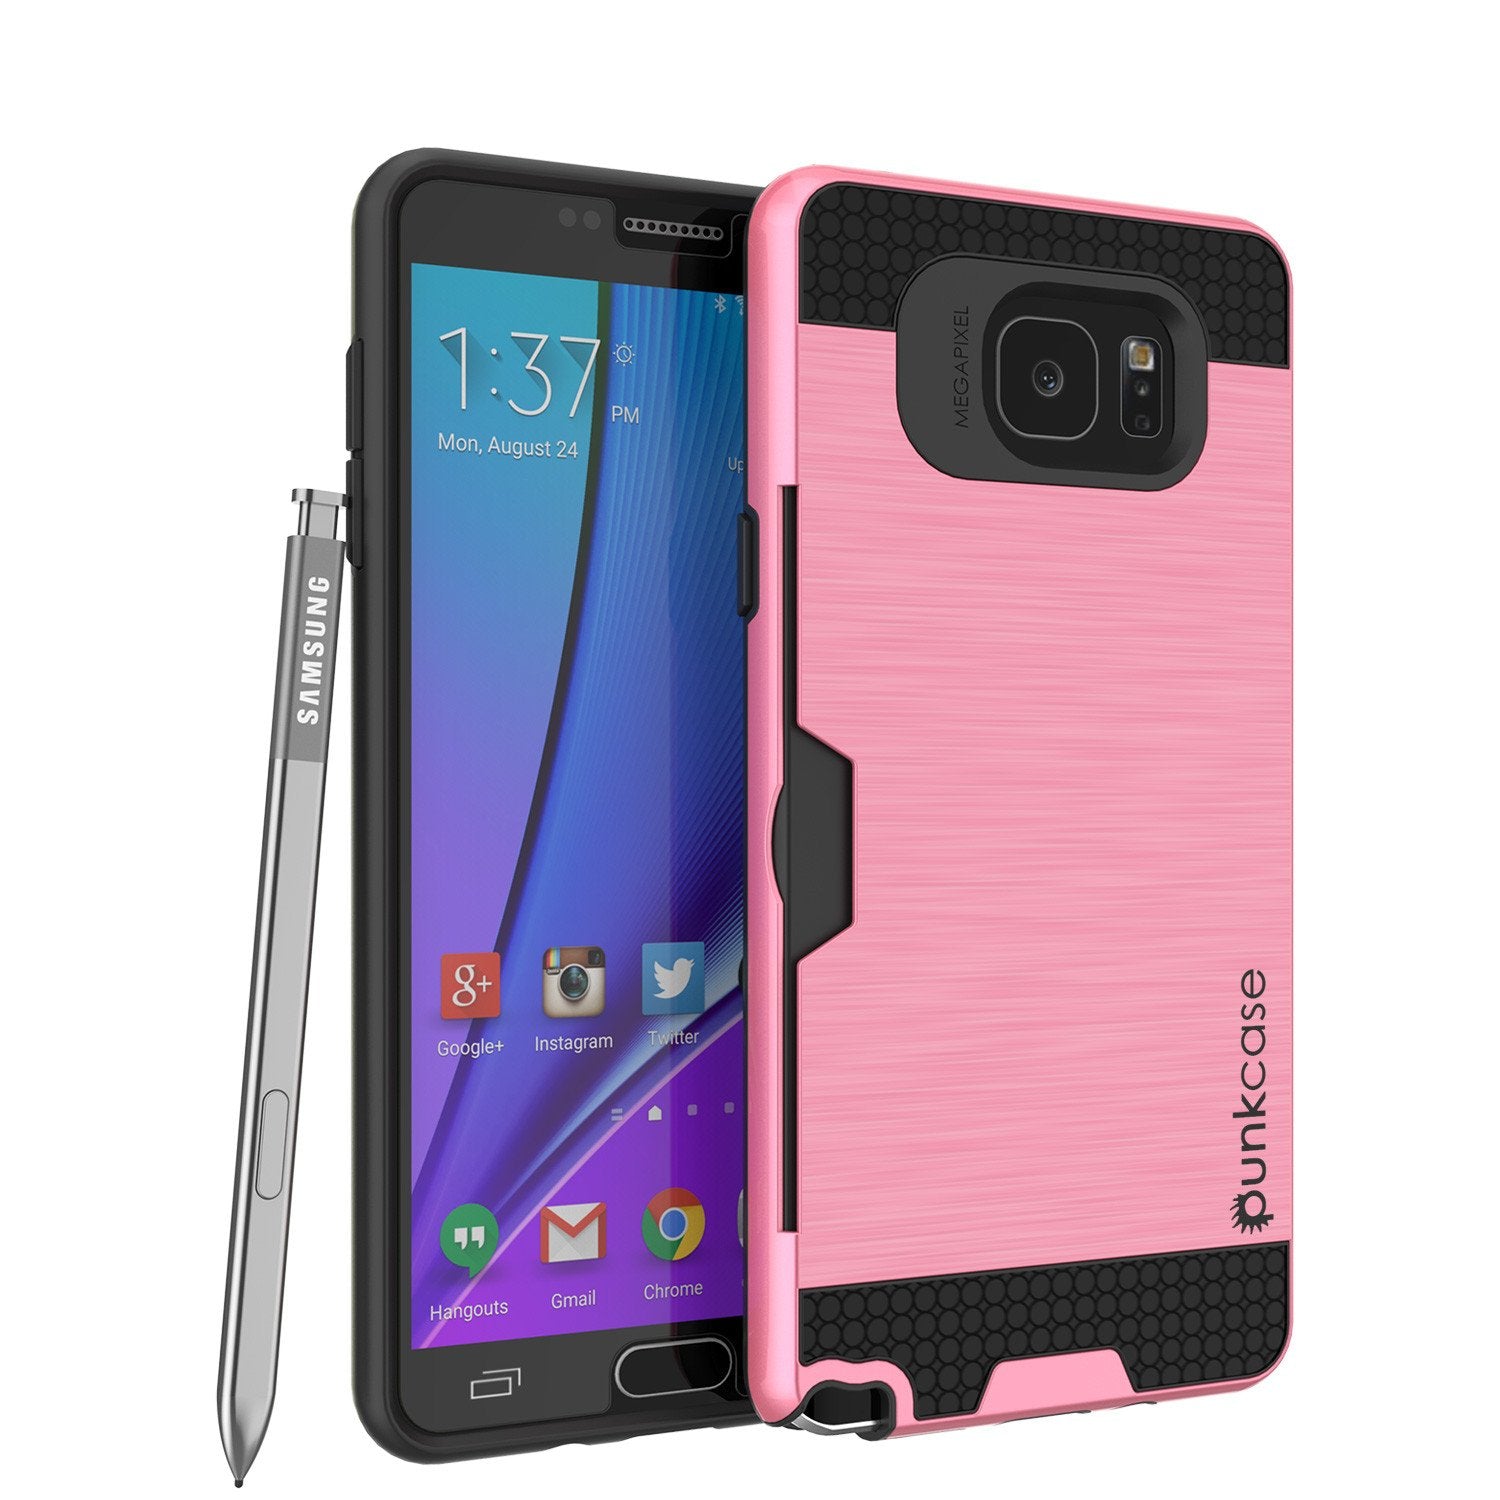 Galaxy Note 5 Case PunkCase SLOT Pink Series Slim Armor Soft Cover Case w/ Tempered Glass